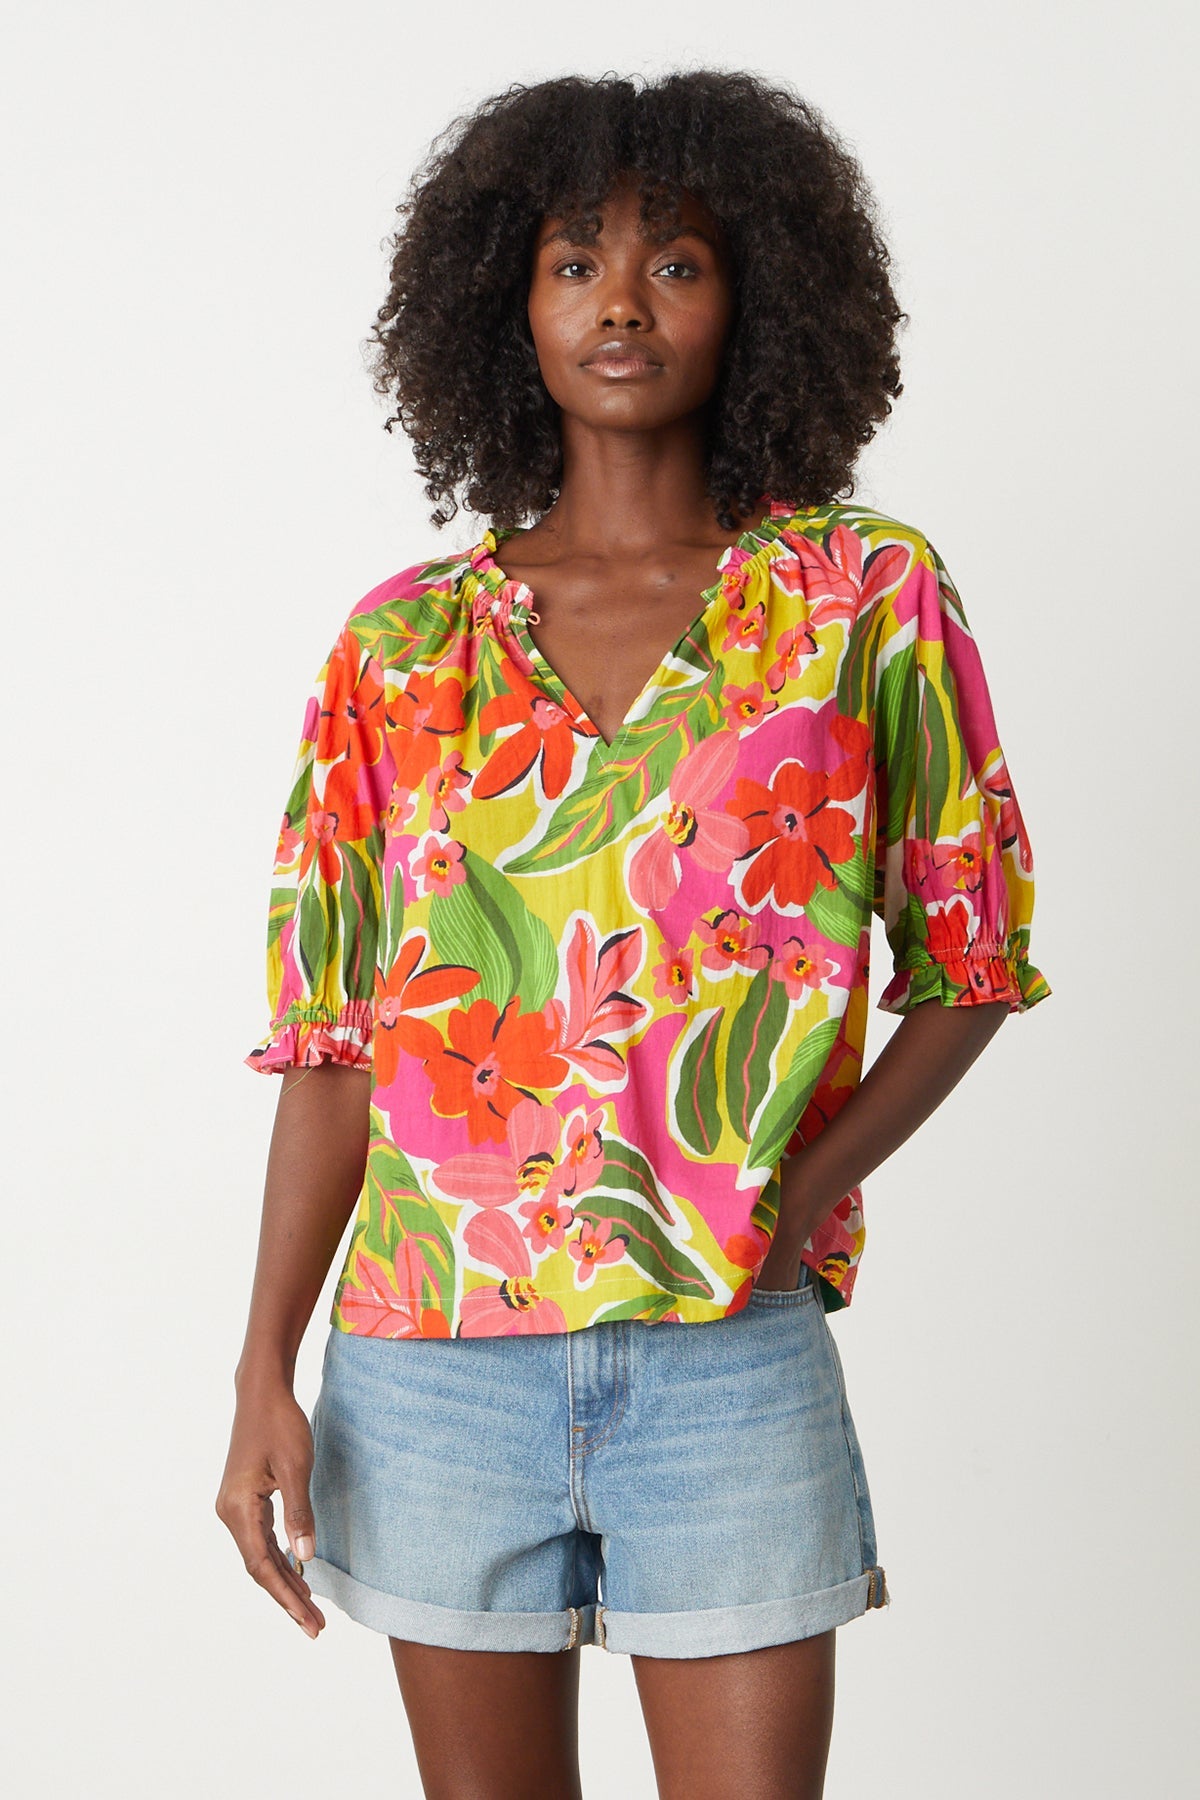 Carrie Boho Top in bold floral aloha print with reds, hot pinks and greens tucked into blue denim shorts, model's hand in denim pocket-26715112865985